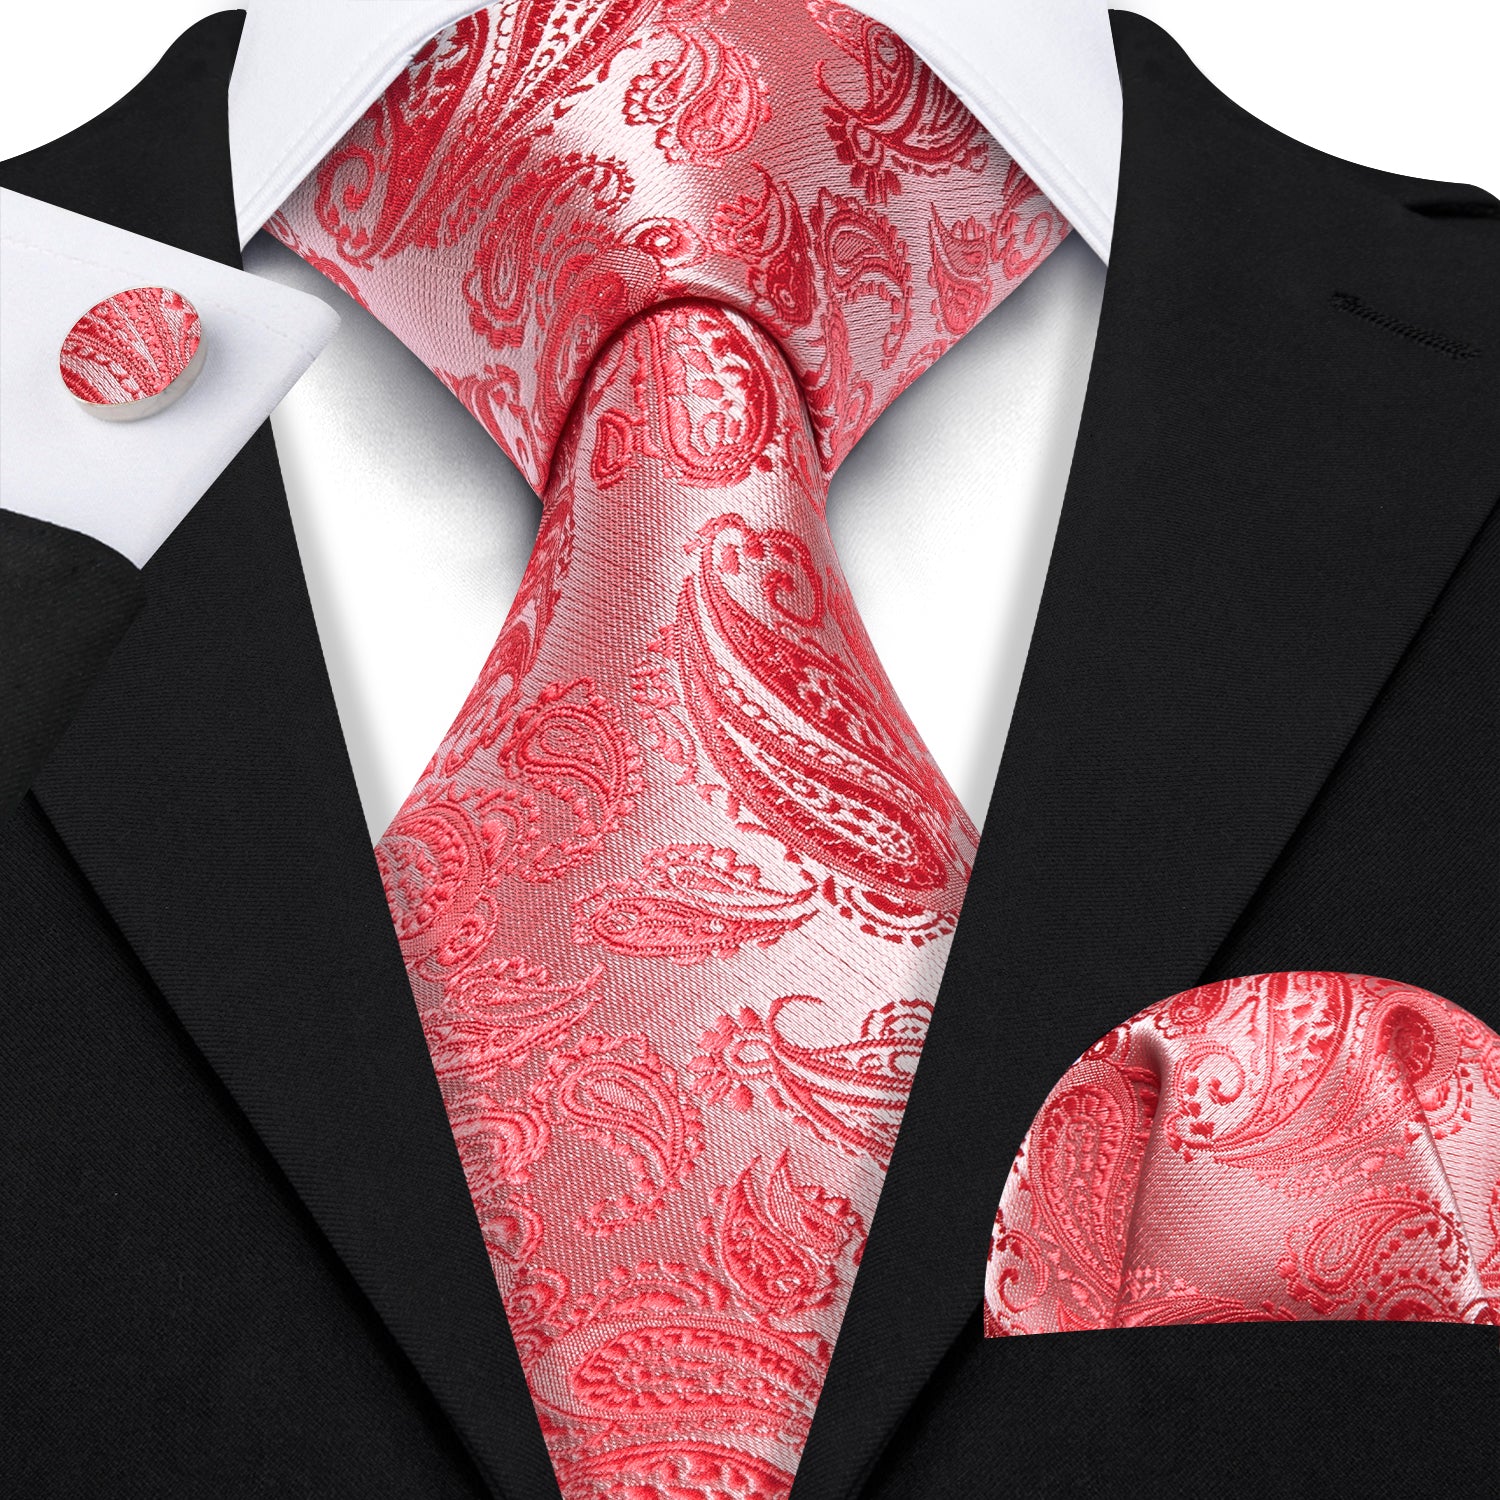 Indian Red Paisley Silk 63 Inches Extra Long Tie Hanky Cufflinks Set